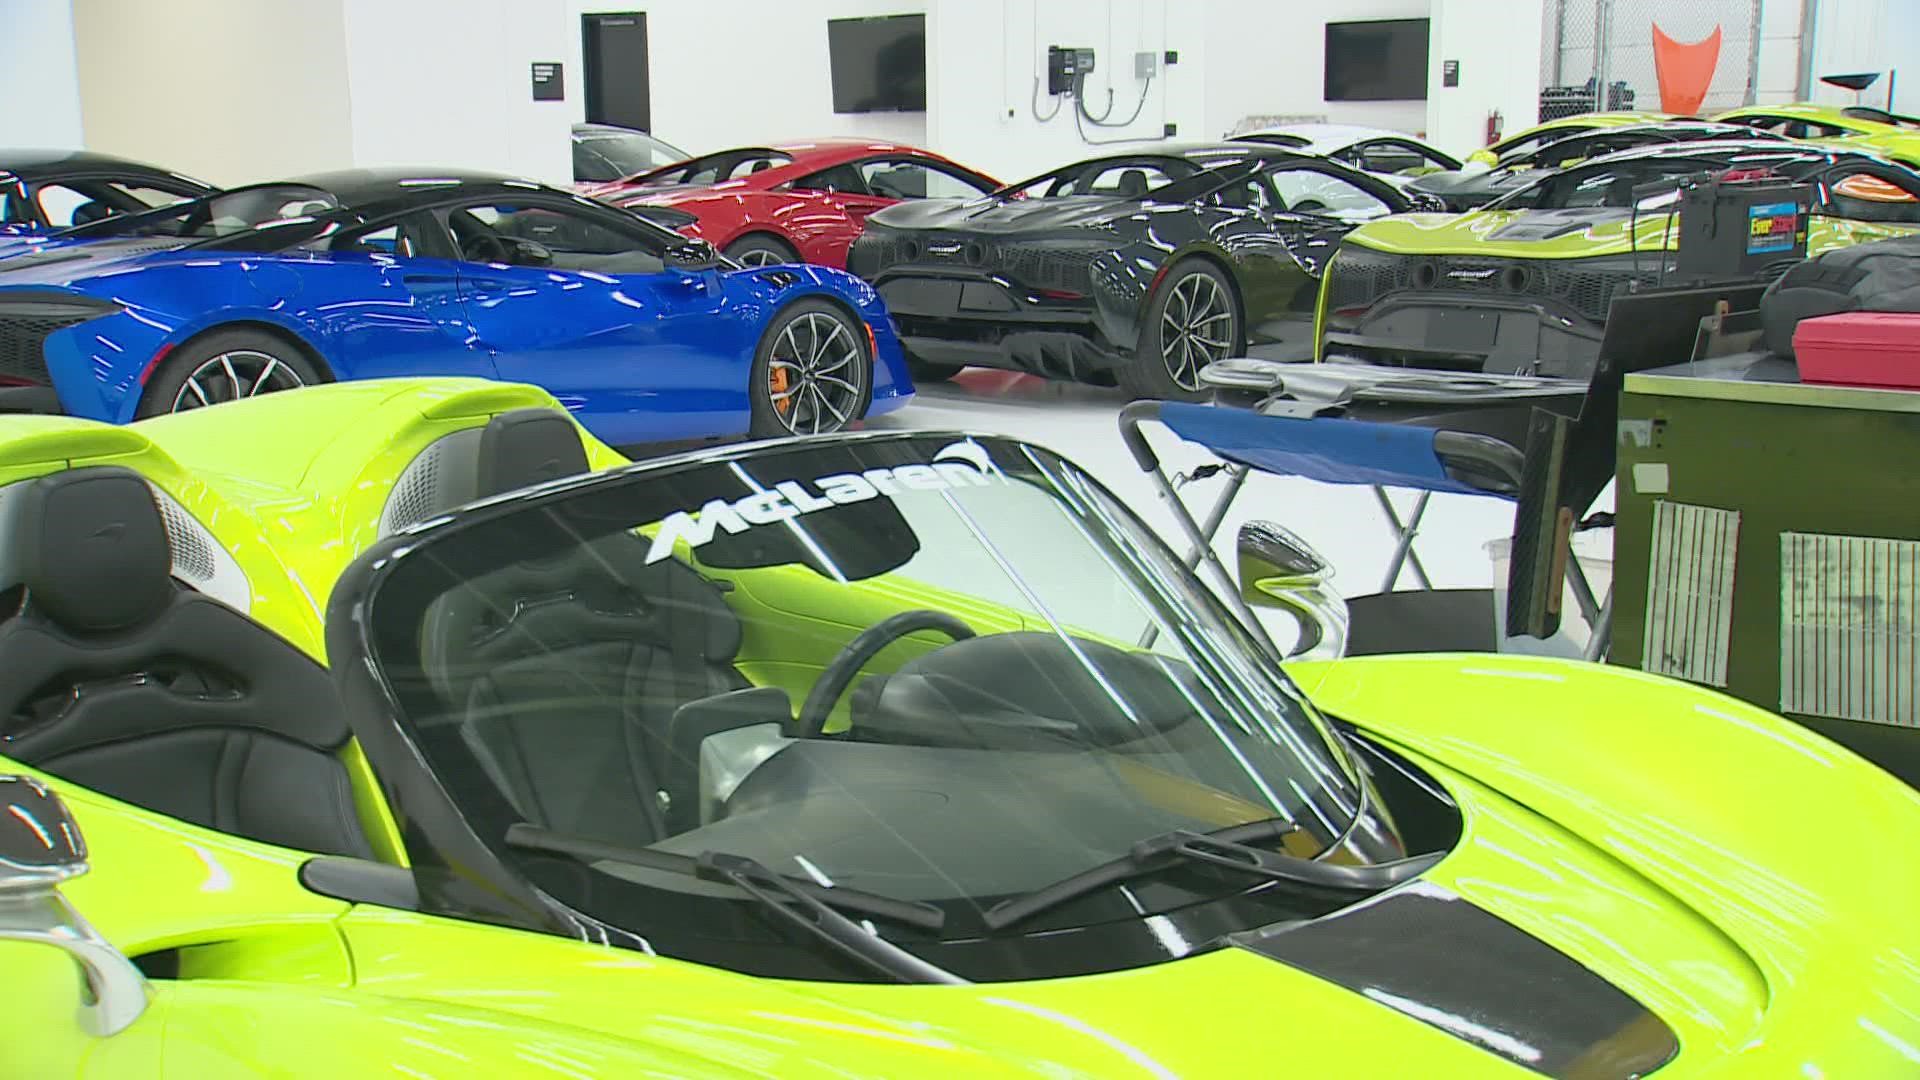 More than 50 McLaren owners were on hand to showcase their supercars at the new headquarters.